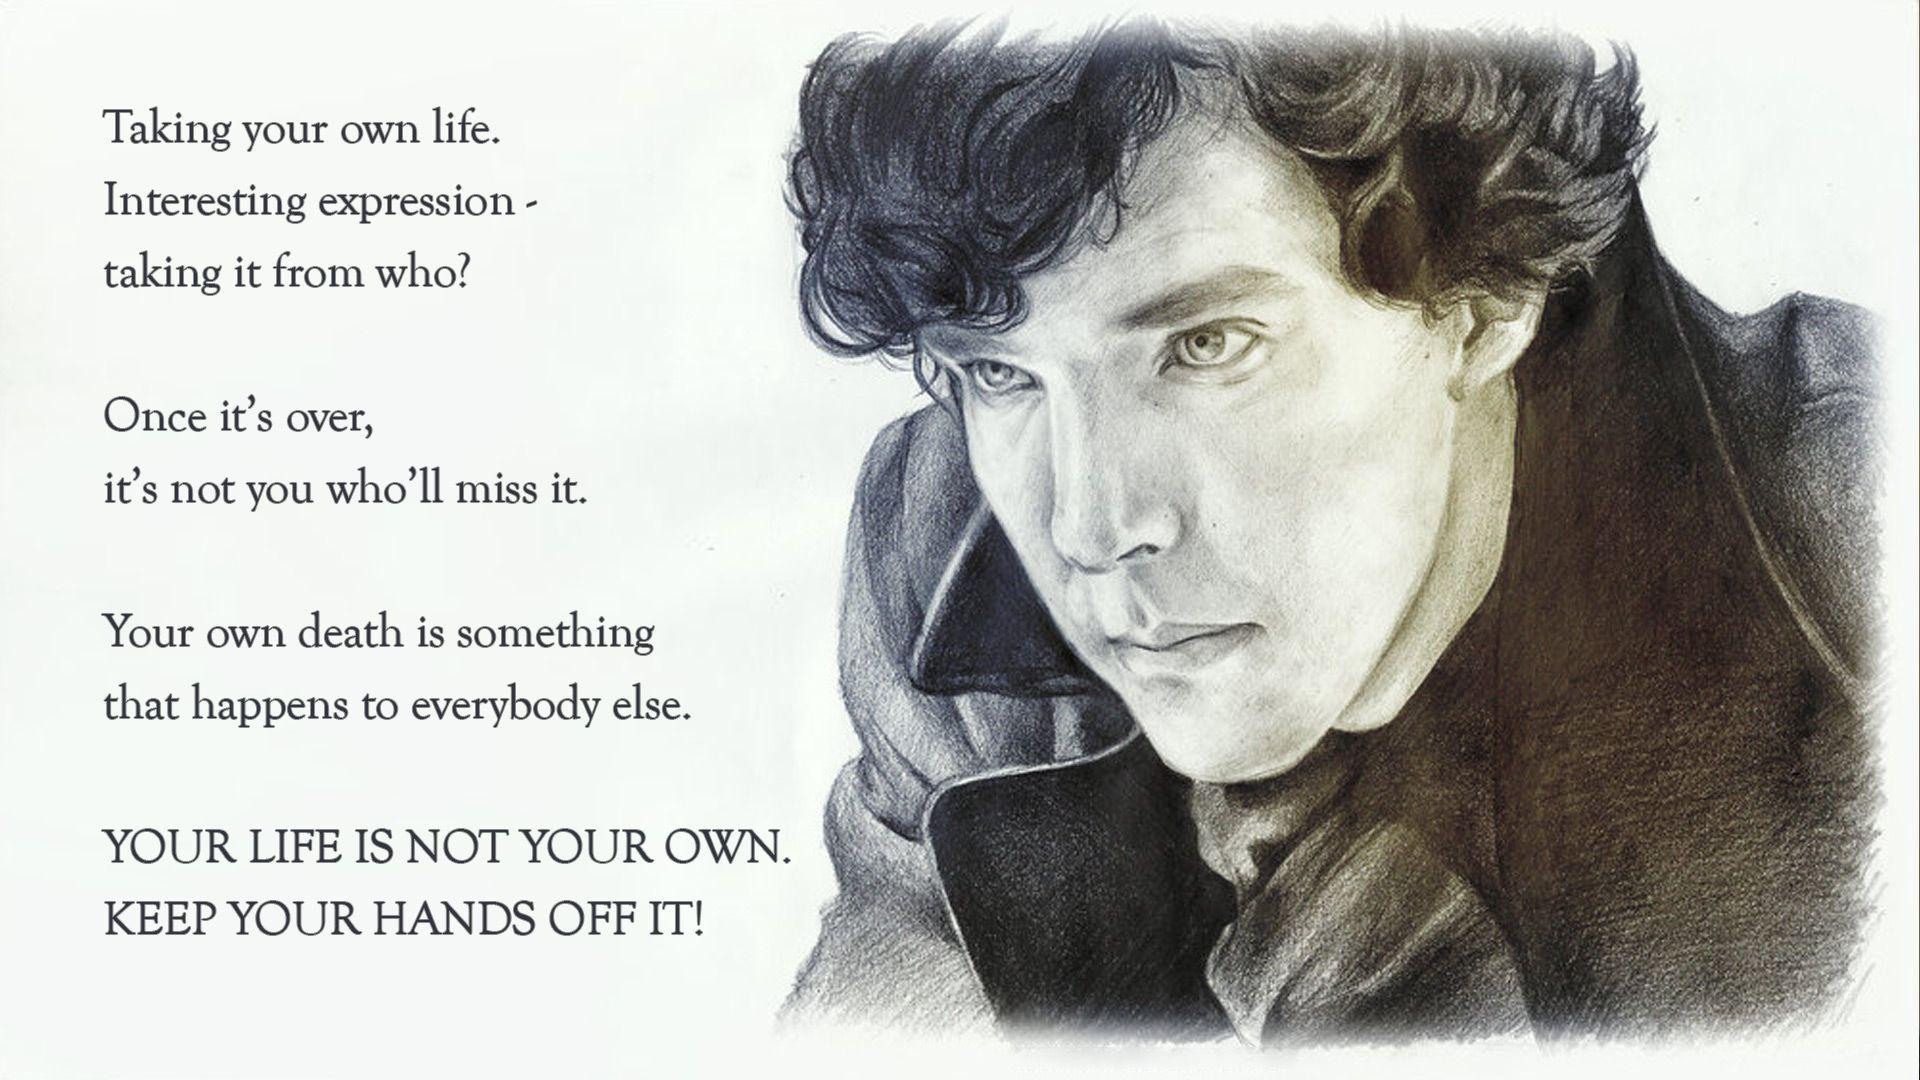 SHERLOCK: Most catchy quotes from The Lying Detective